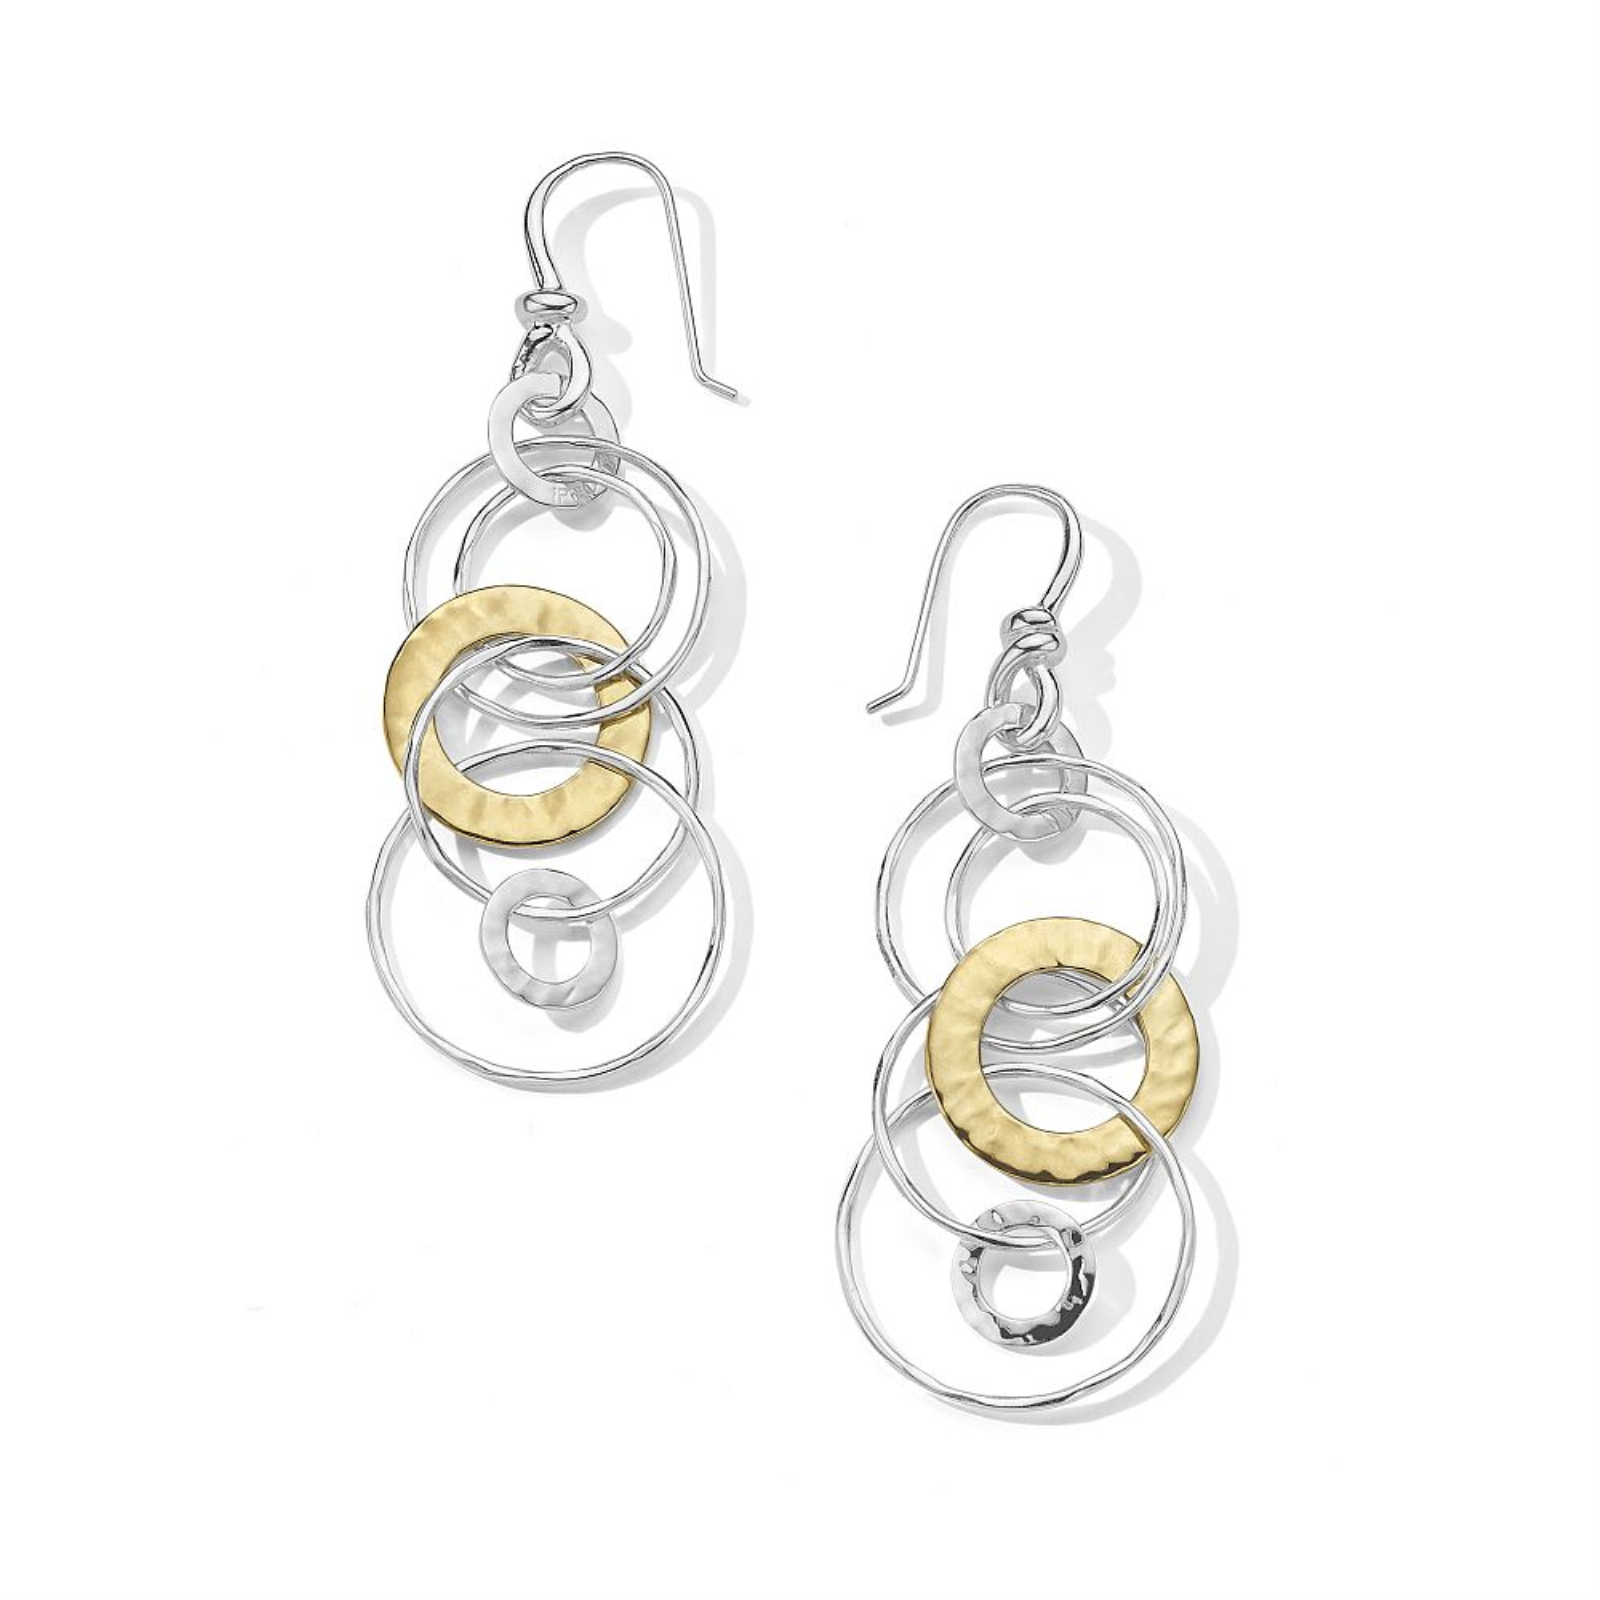 Silver and Gold Hammered Jet Set Earrings